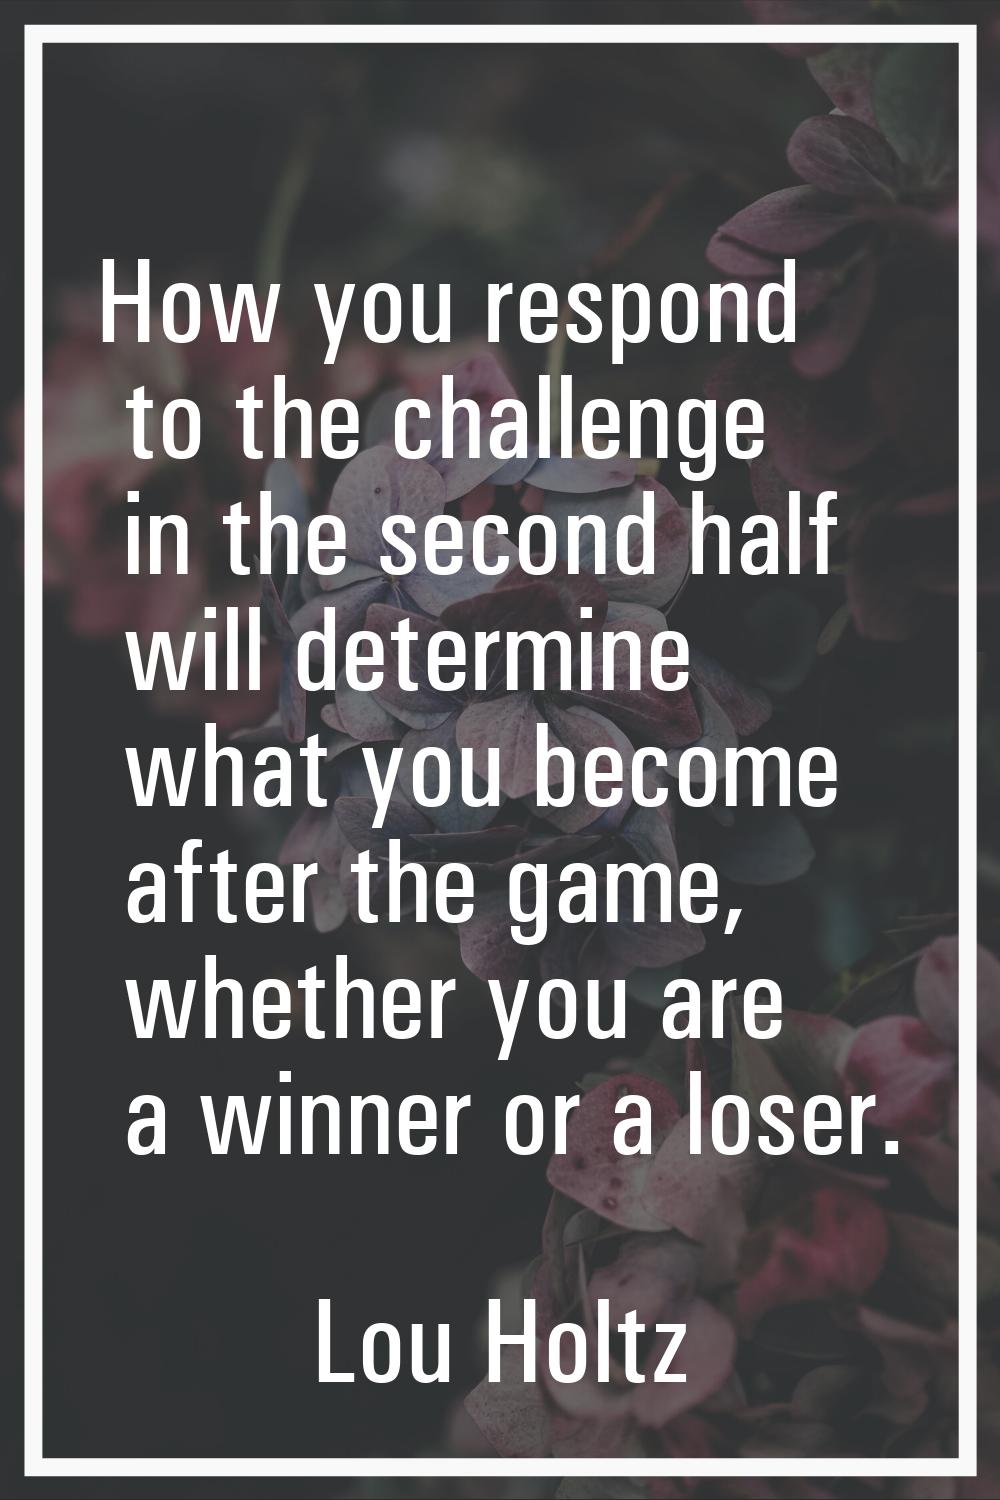 How you respond to the challenge in the second half will determine what you become after the game, 